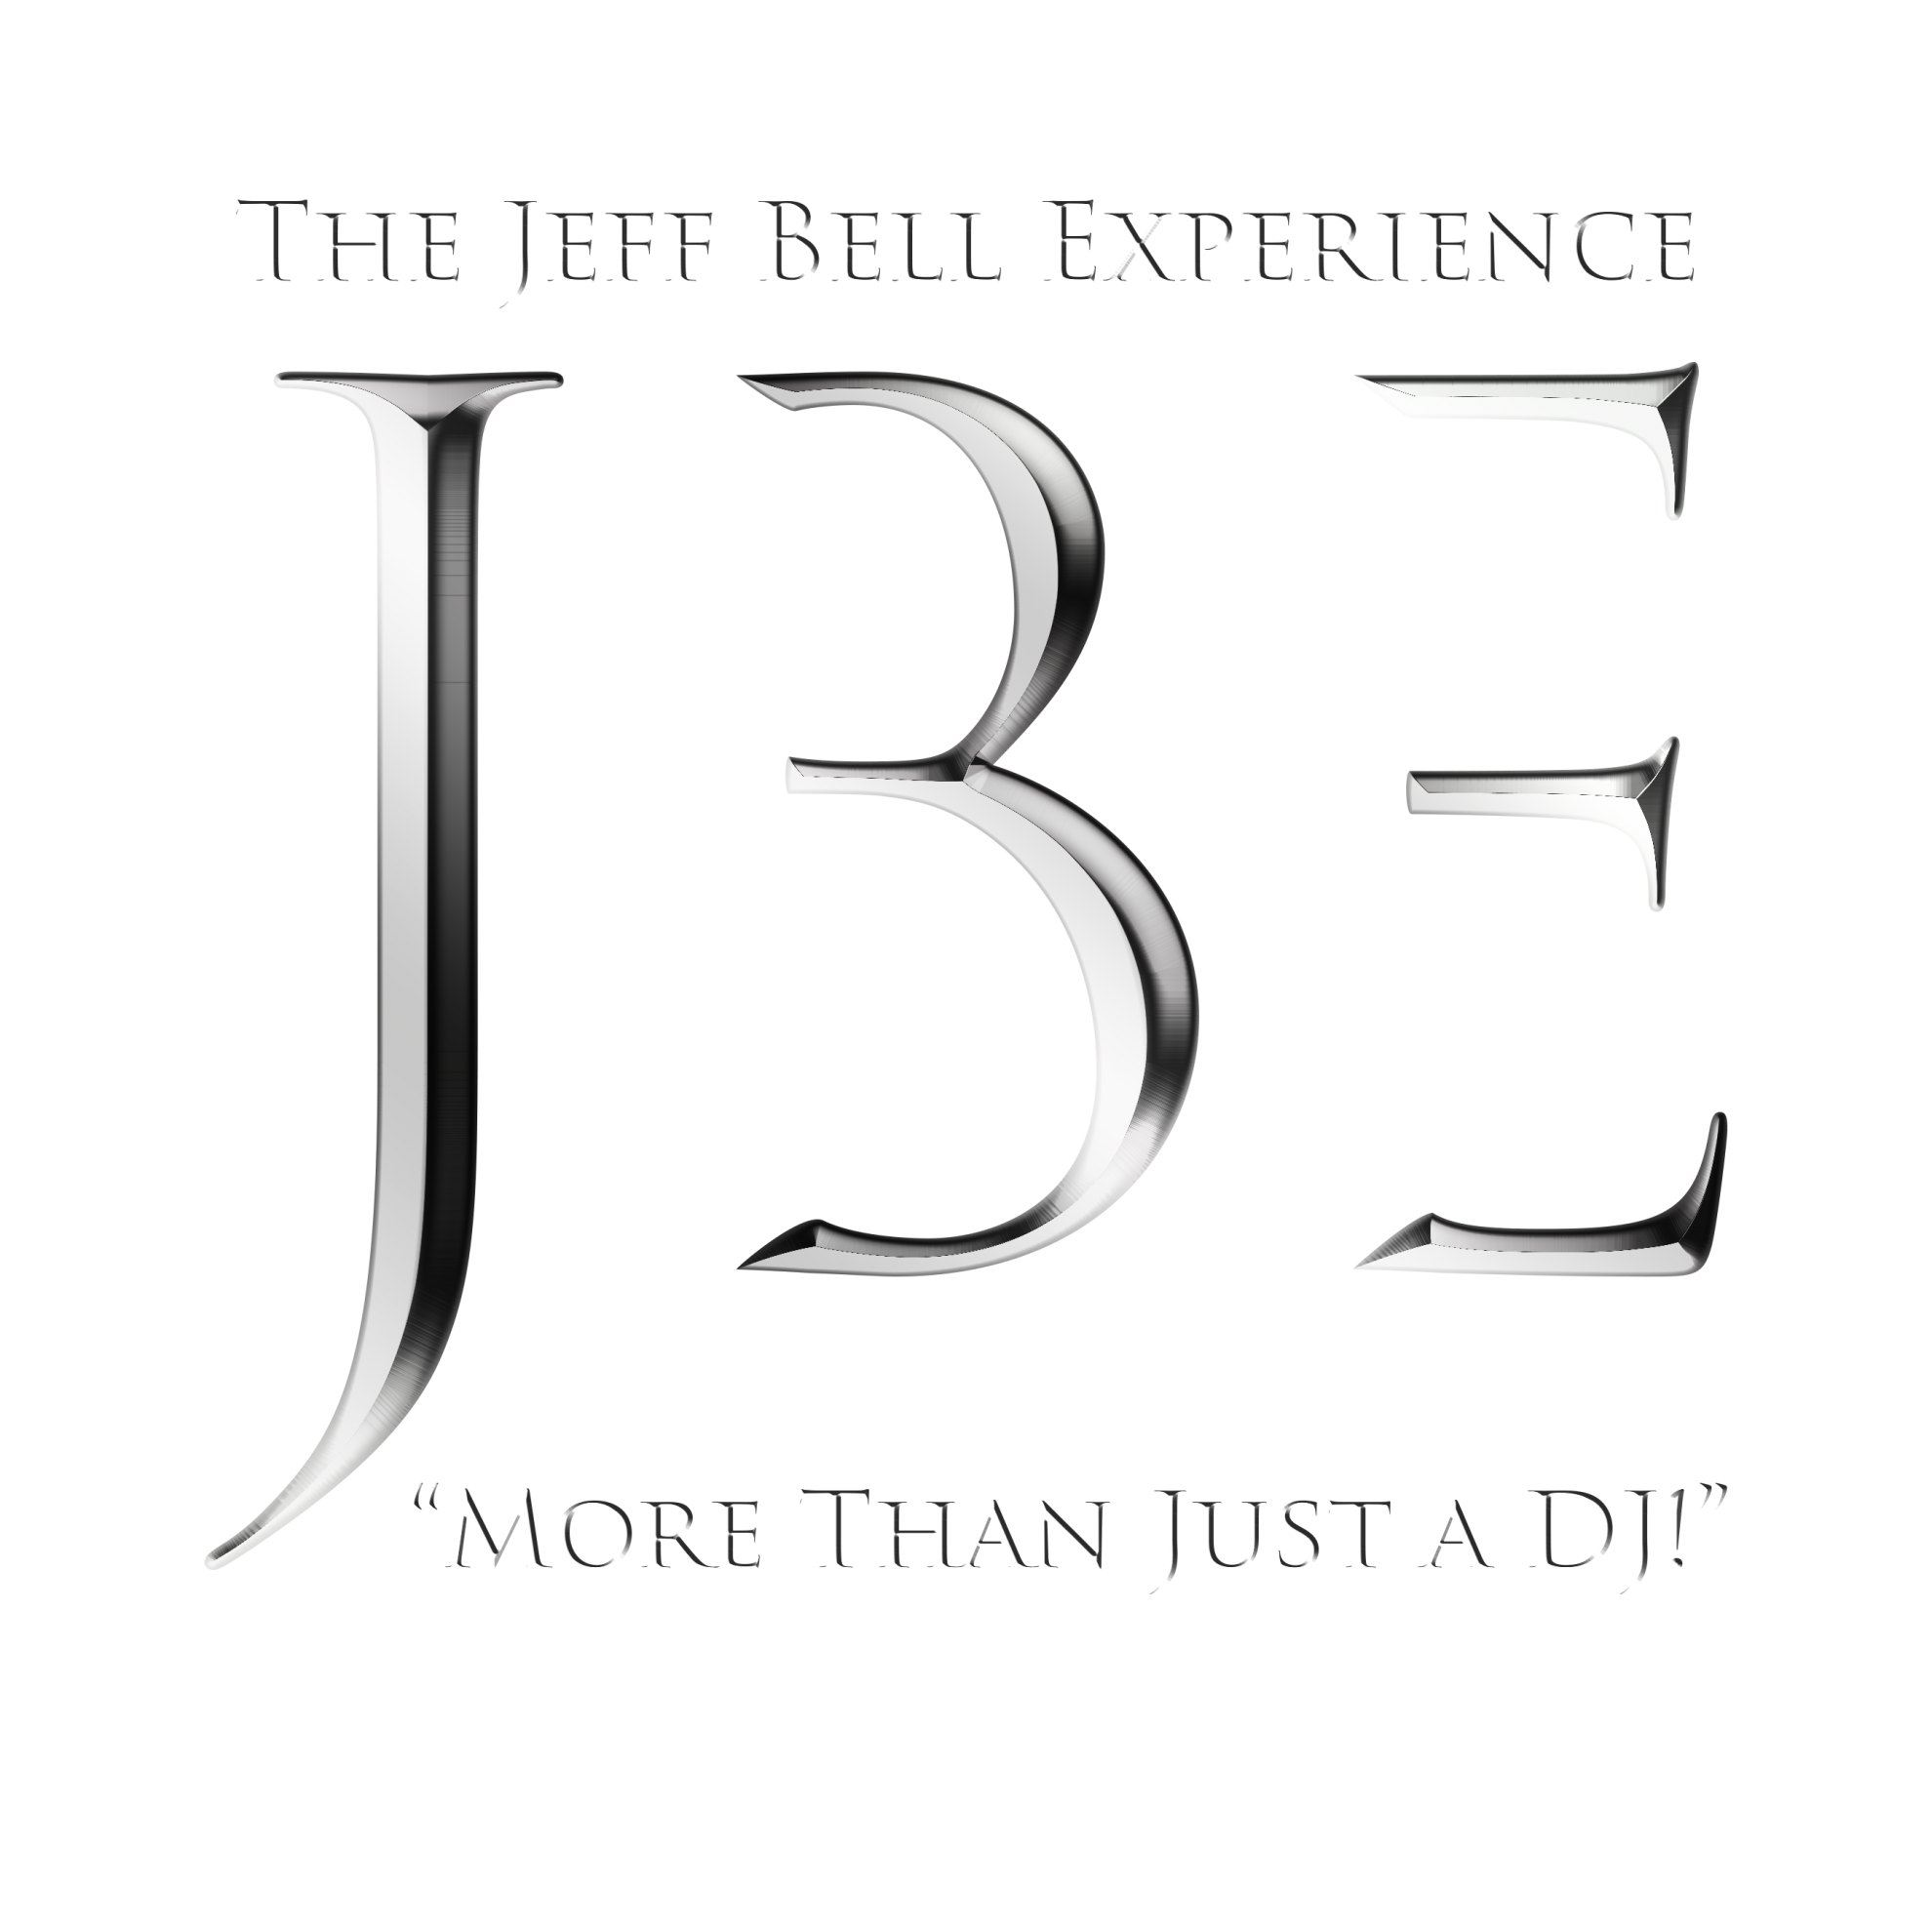 10 Questions with Jeff Bell